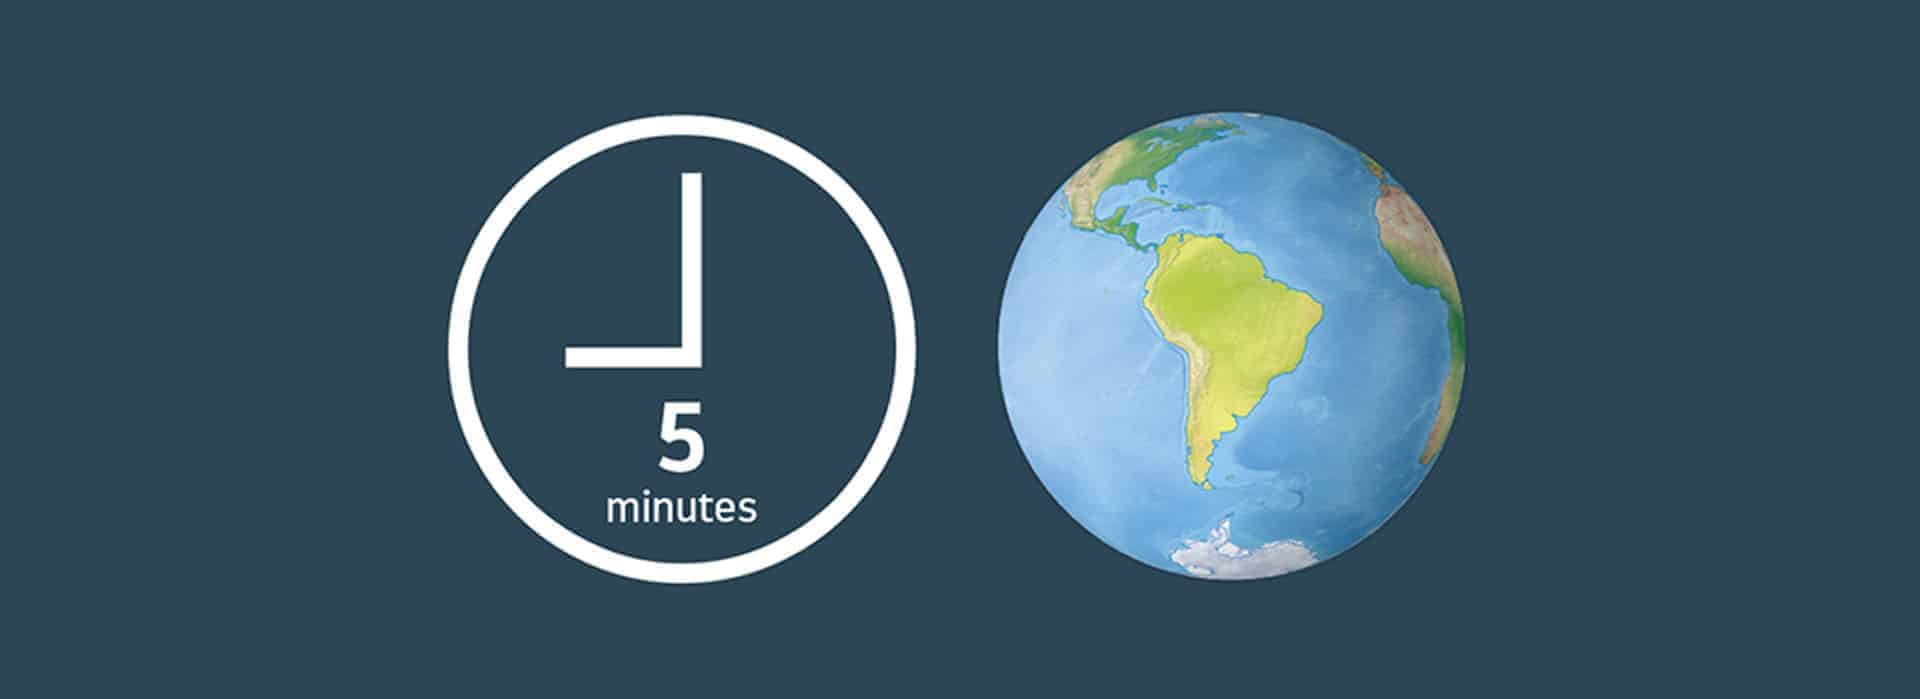 Infographic - A perfect globe for your design in just 5 minutes